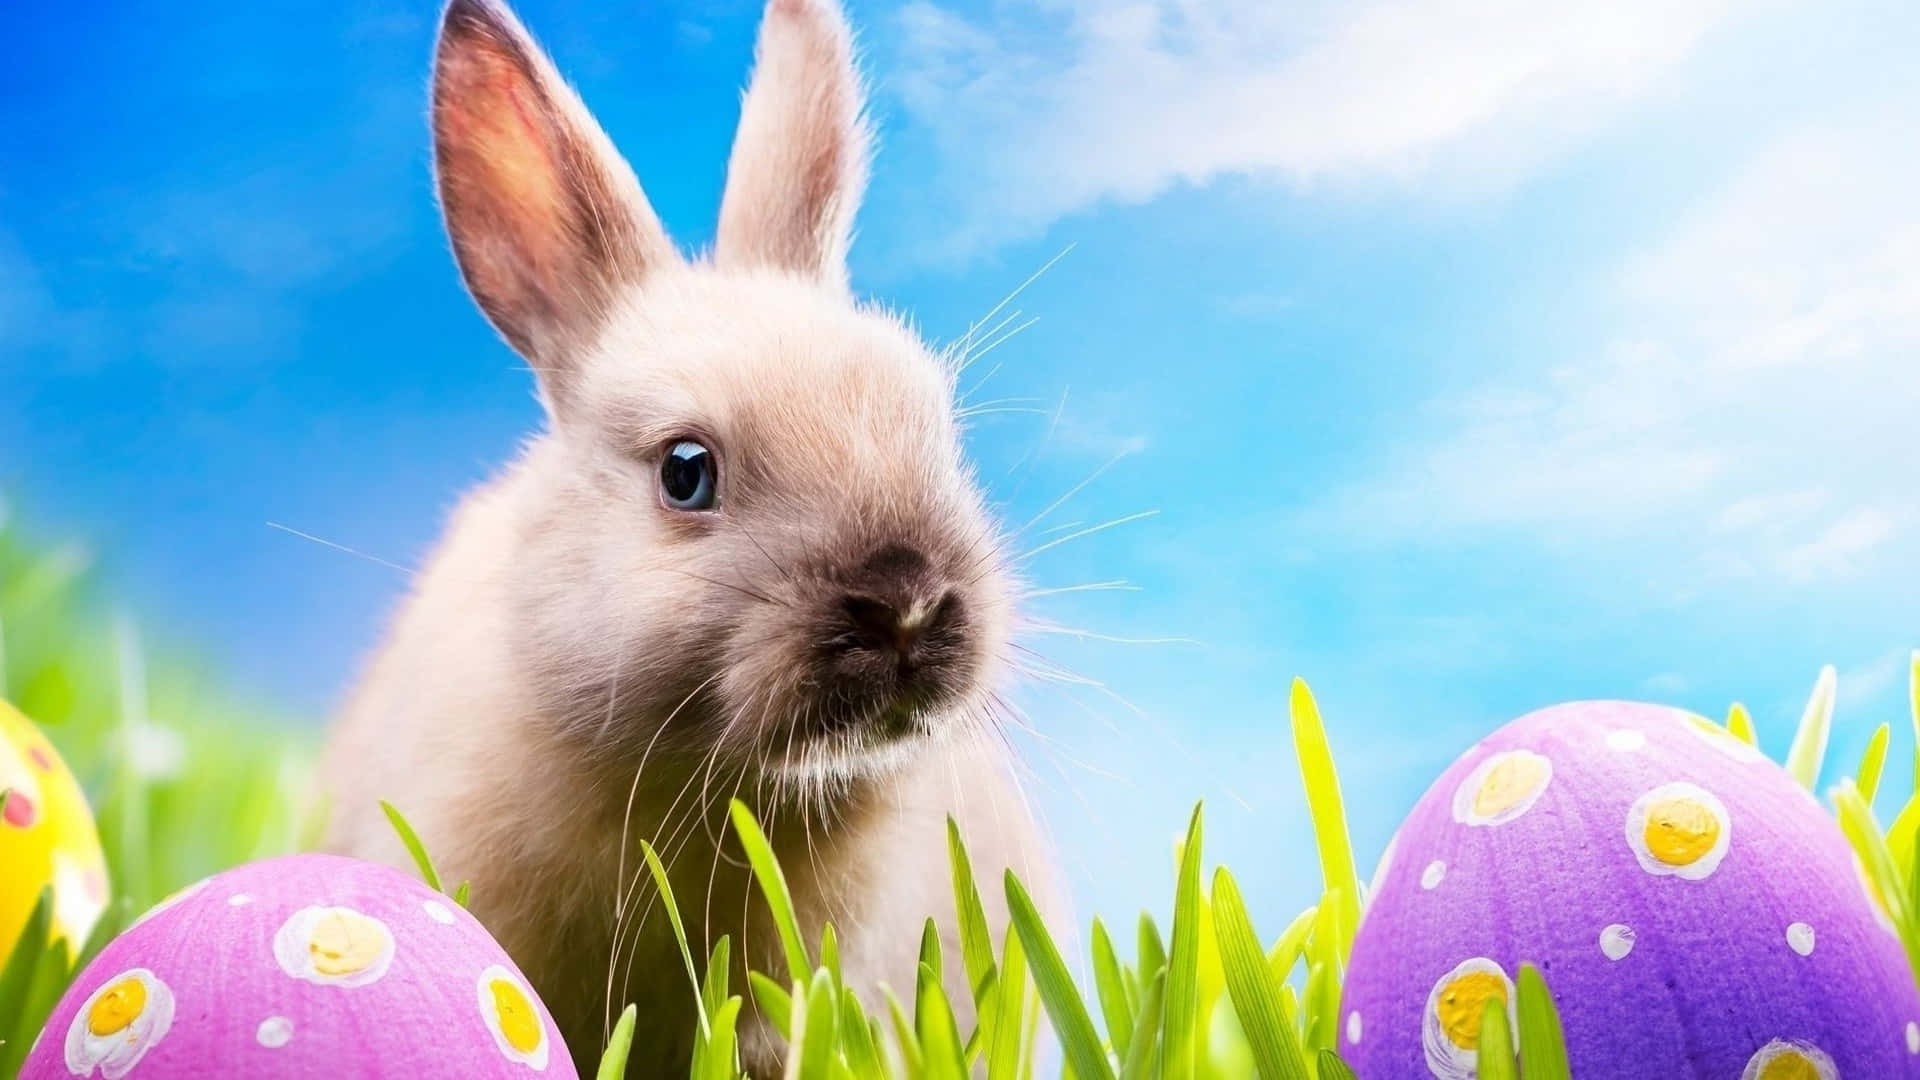 Adorable Easter Bunny and Colorful Eggs on a Festive Background